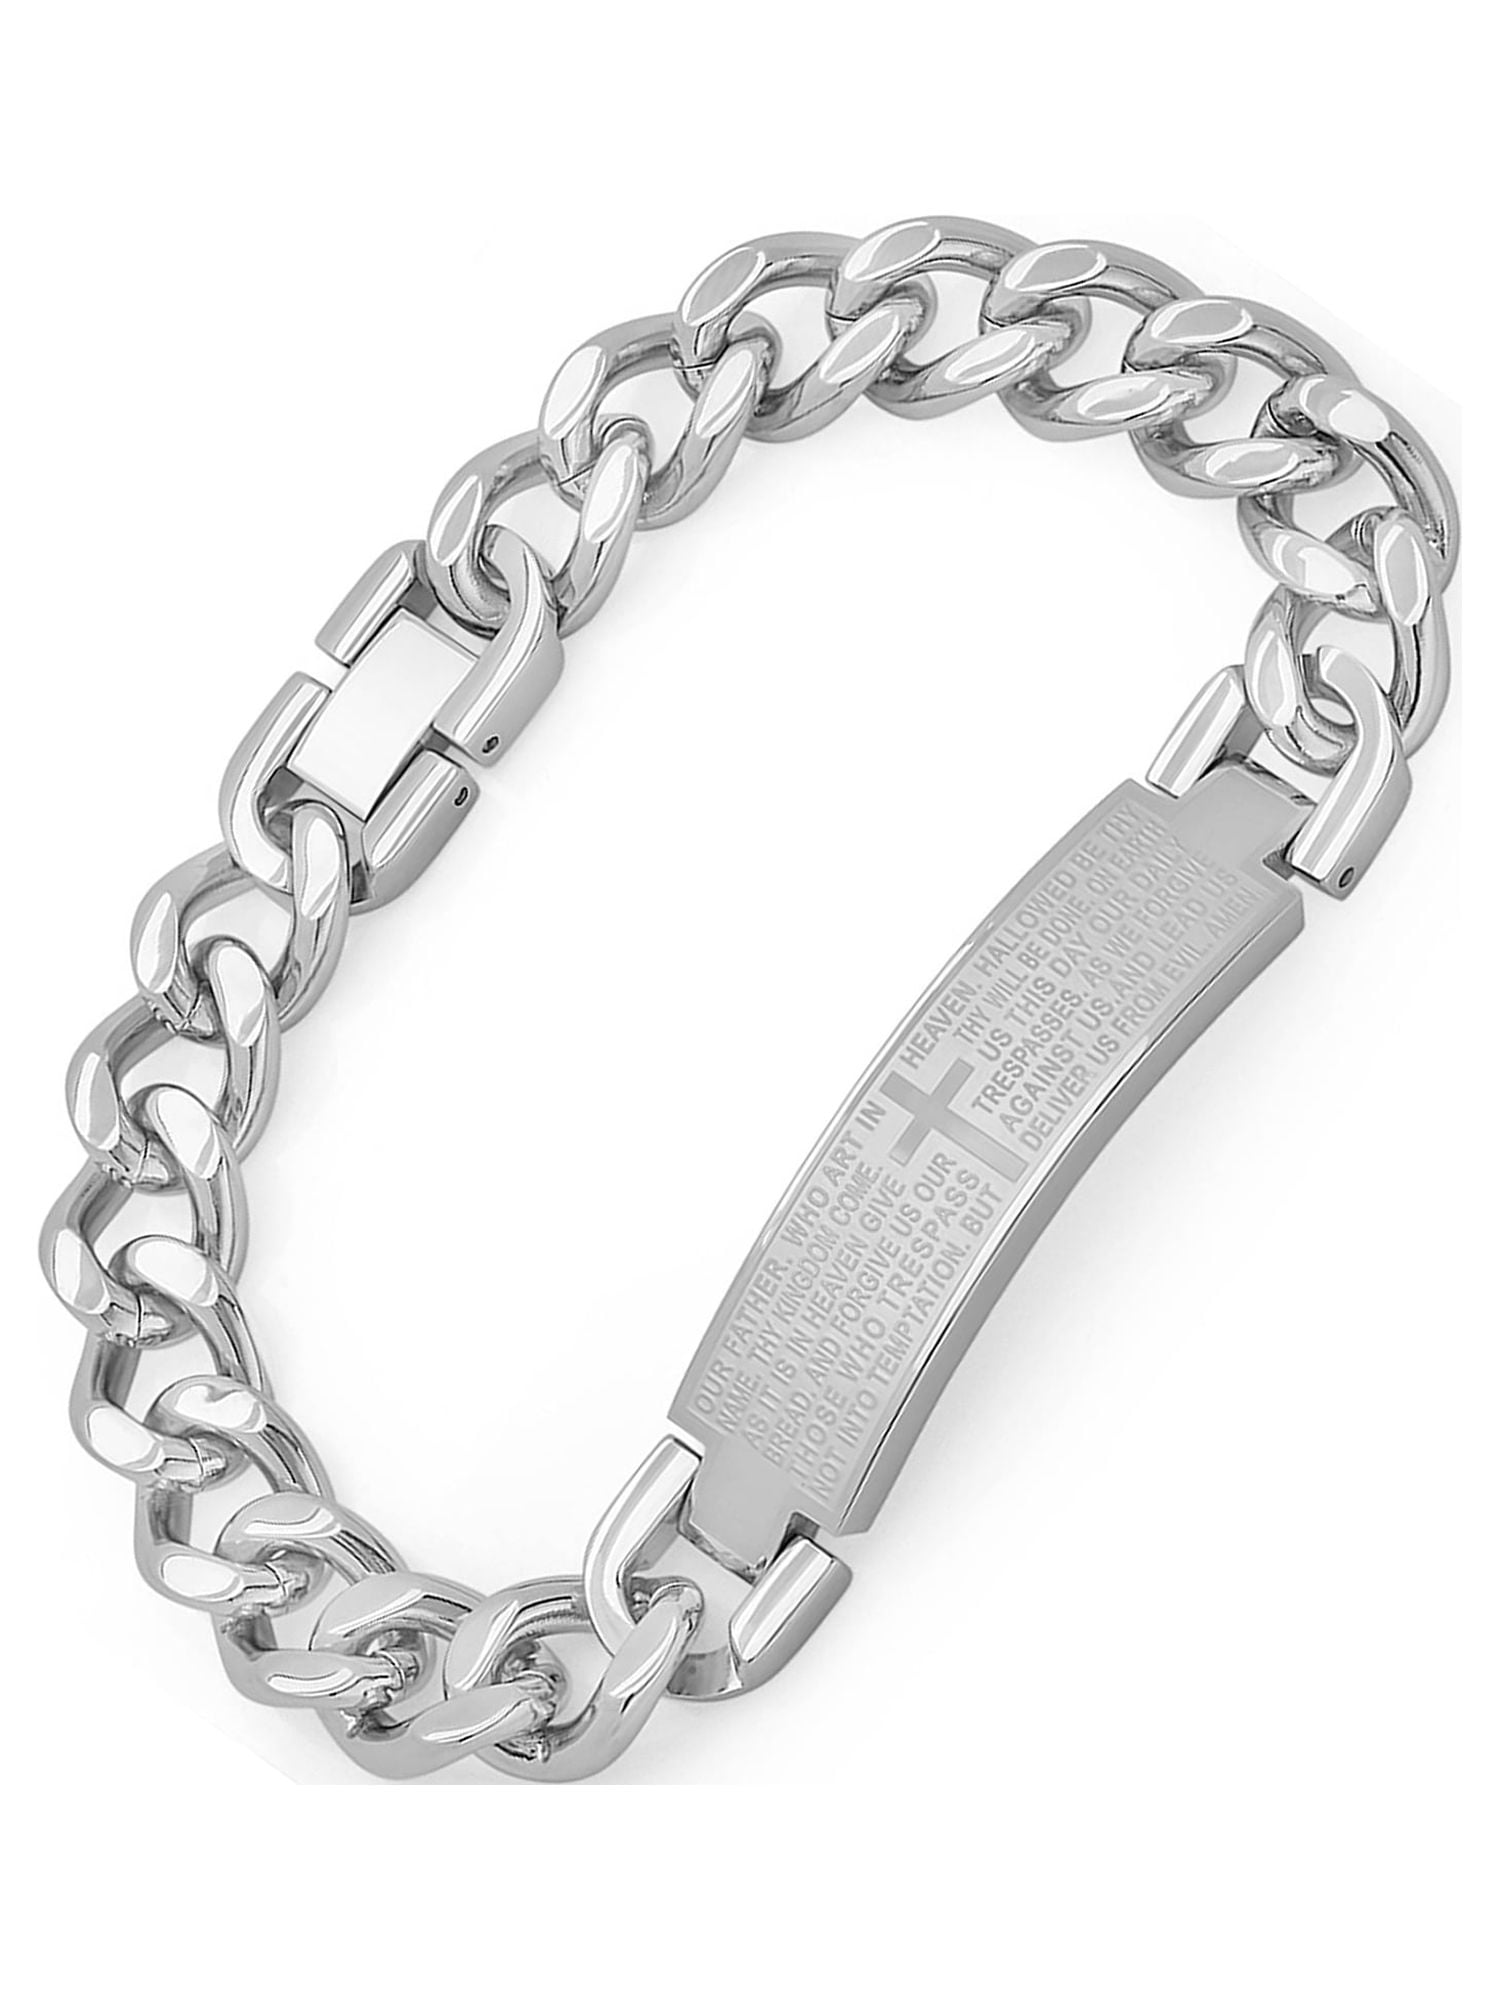 White Sterling Silver bracelet with Stations 8.75 in 17 mm 6 - Walmart.com